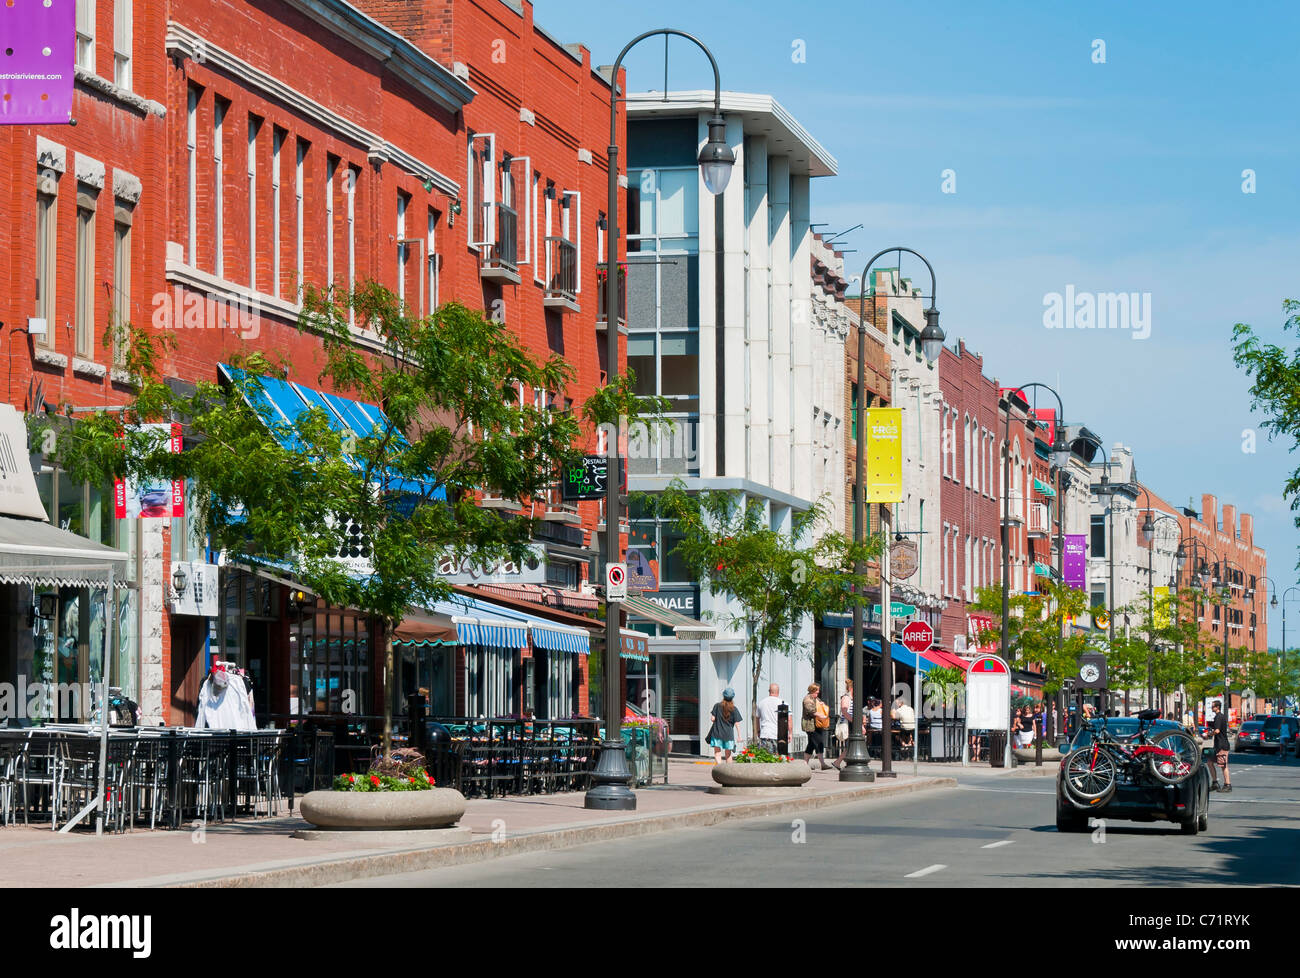 Rue des Forges, commercial street downtown city of Trois Rivieres Mauricie Province of Quebec Canada Stock Photo